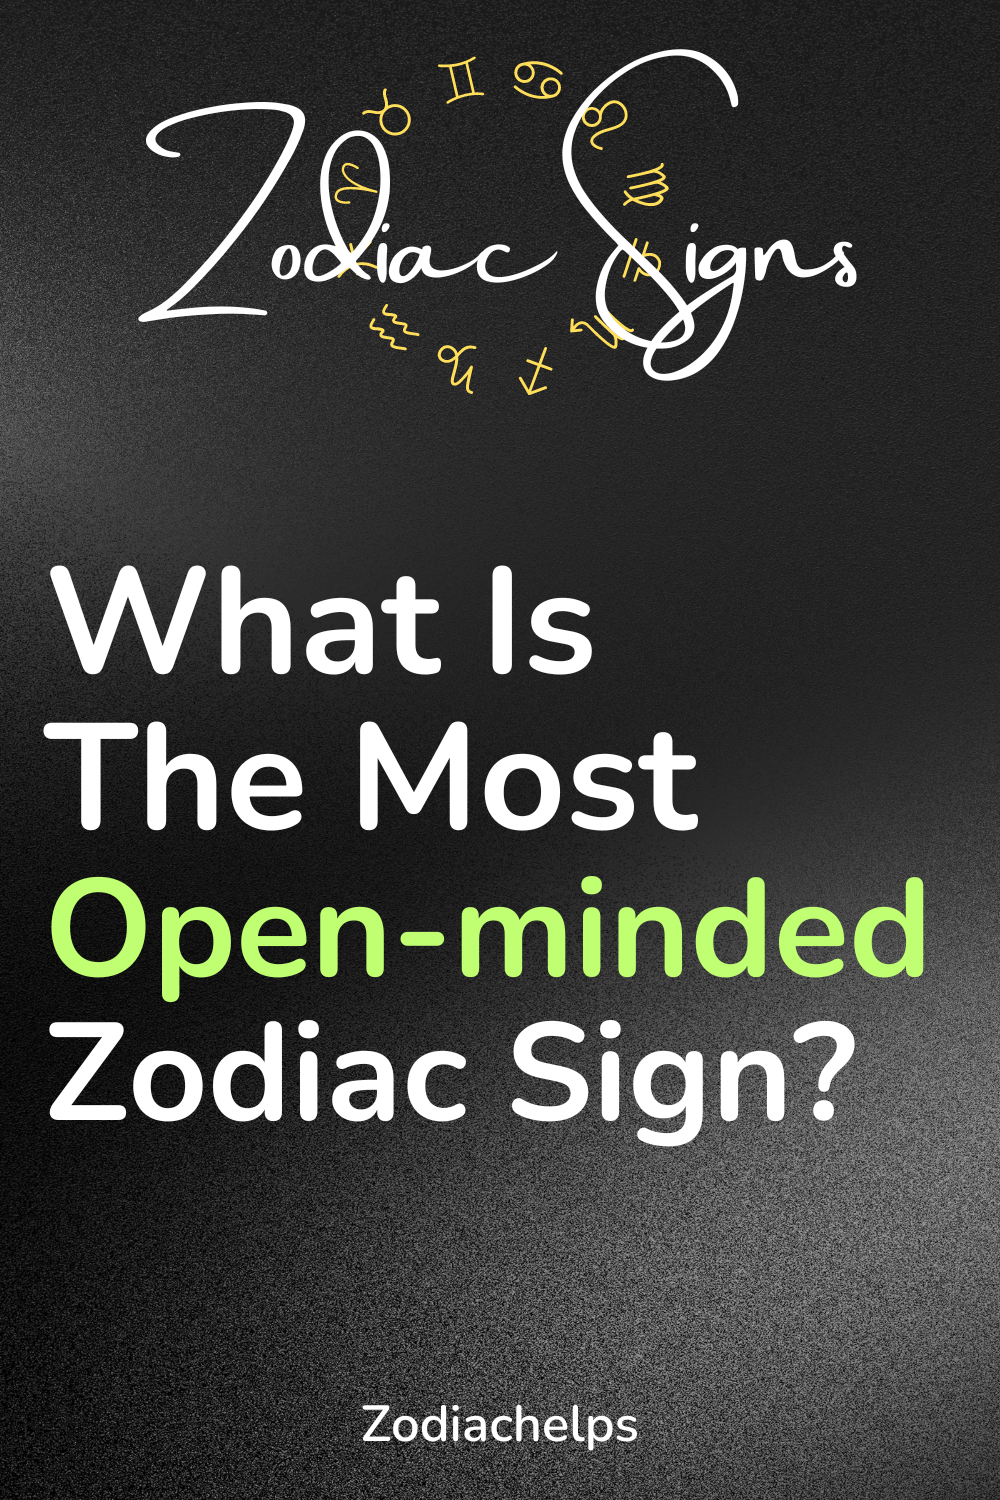 What Is The Most Open-minded Zodiac Sign?